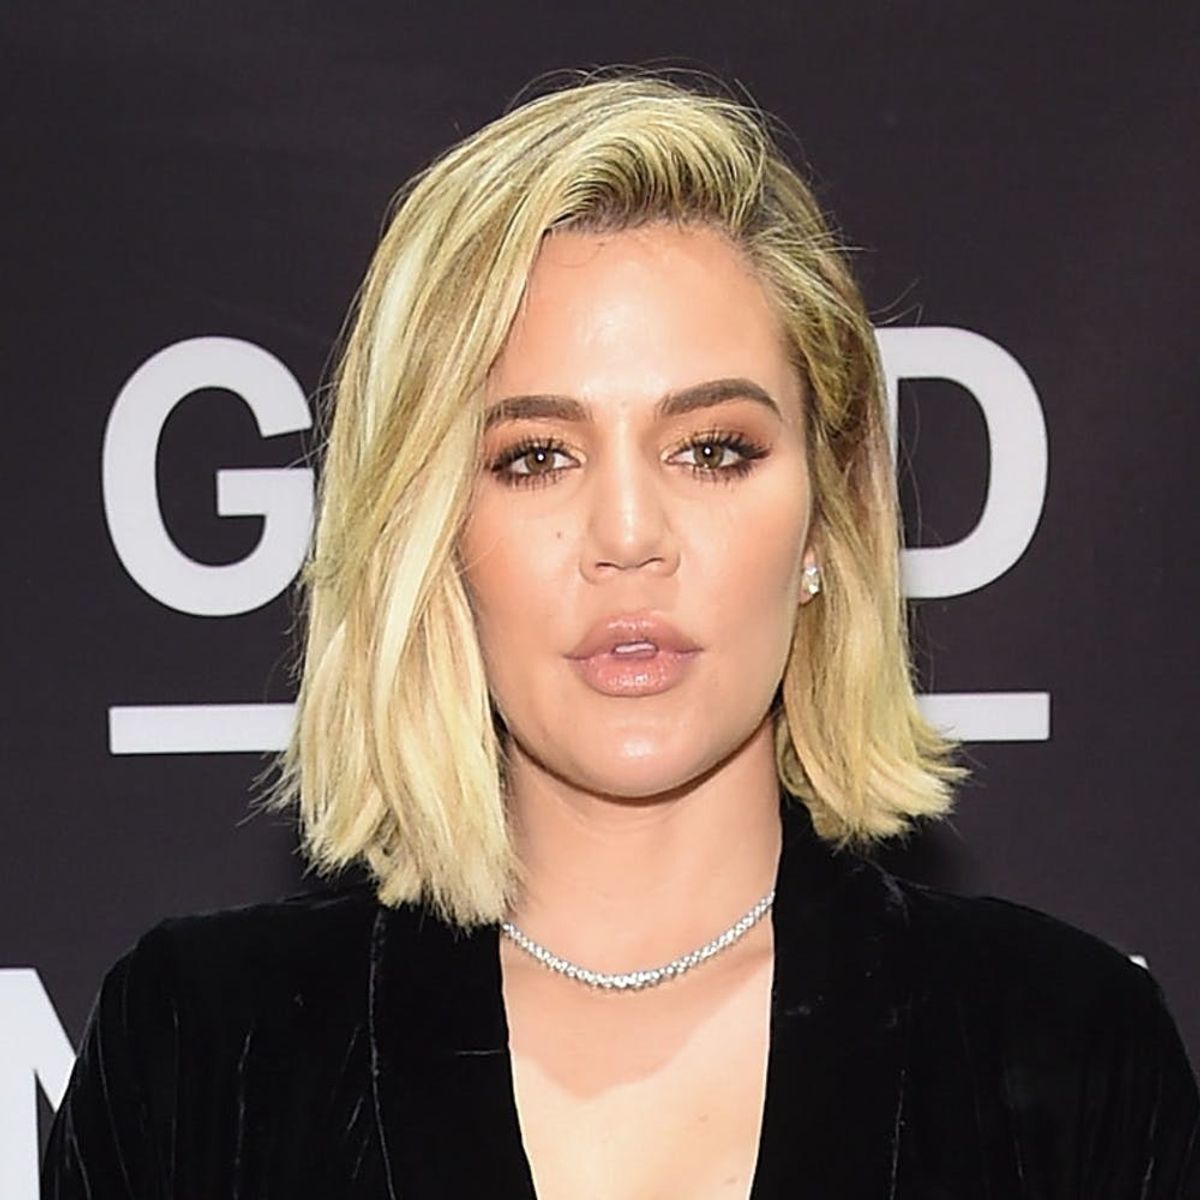 Khloé Kardashian’s Curly NYE ‘Do Is Party Hair Goals